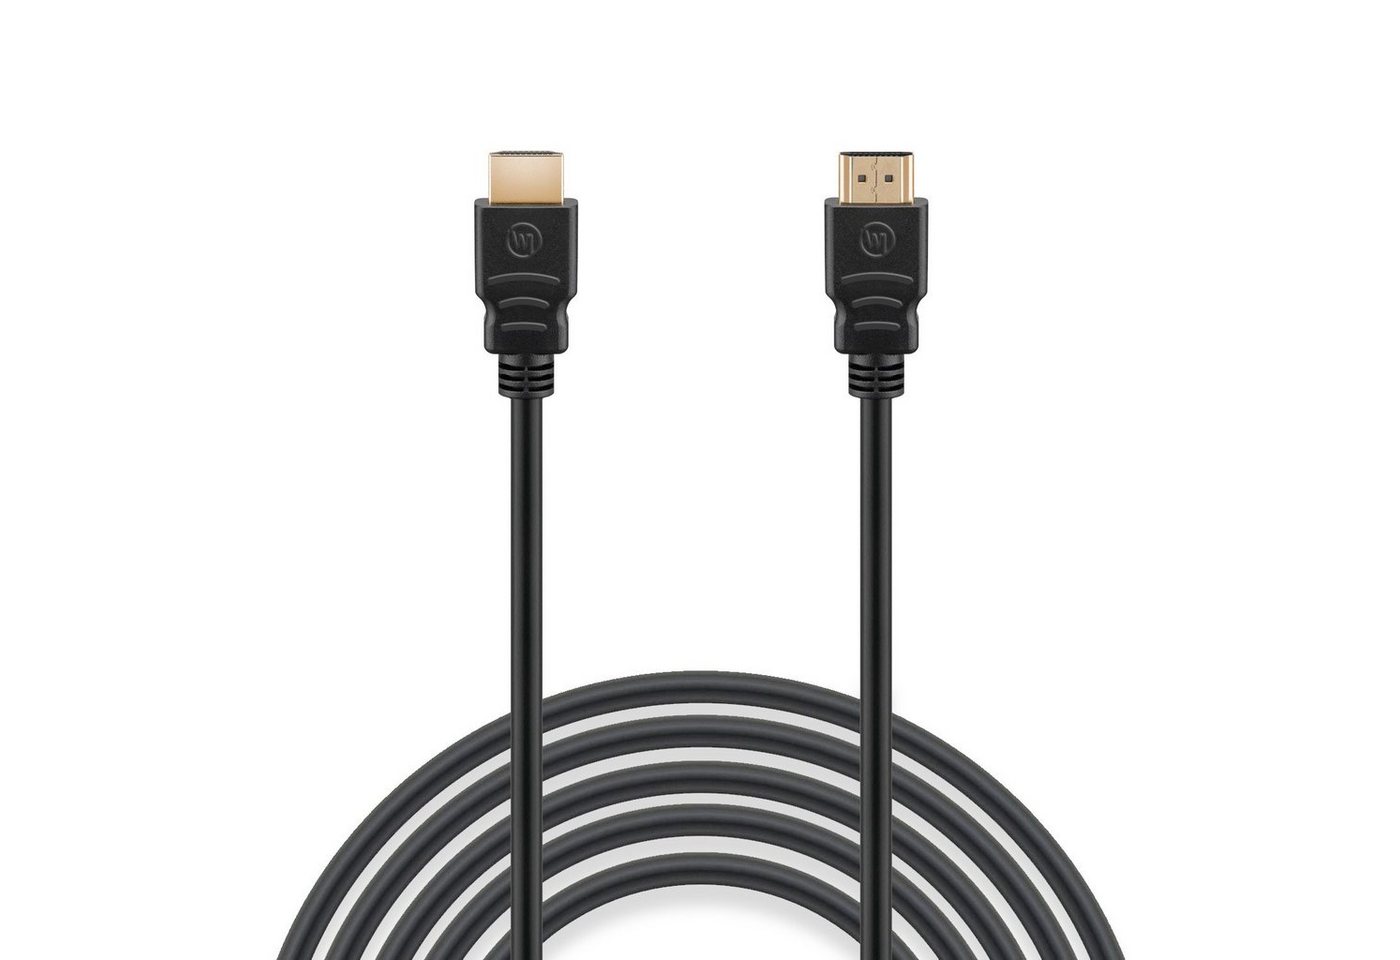 Wicked Chili Wicked Chili HDMI 8k 1m 2m 3m HDMI-Kabel, HDMI Typ A, HDMI (200 cm), HDMI 2.1 Kabel, 8K HDMI Kabel, 8K 60Hz, 4K 120Hz, HDR10, 48Gbps eARC von Wicked Chili